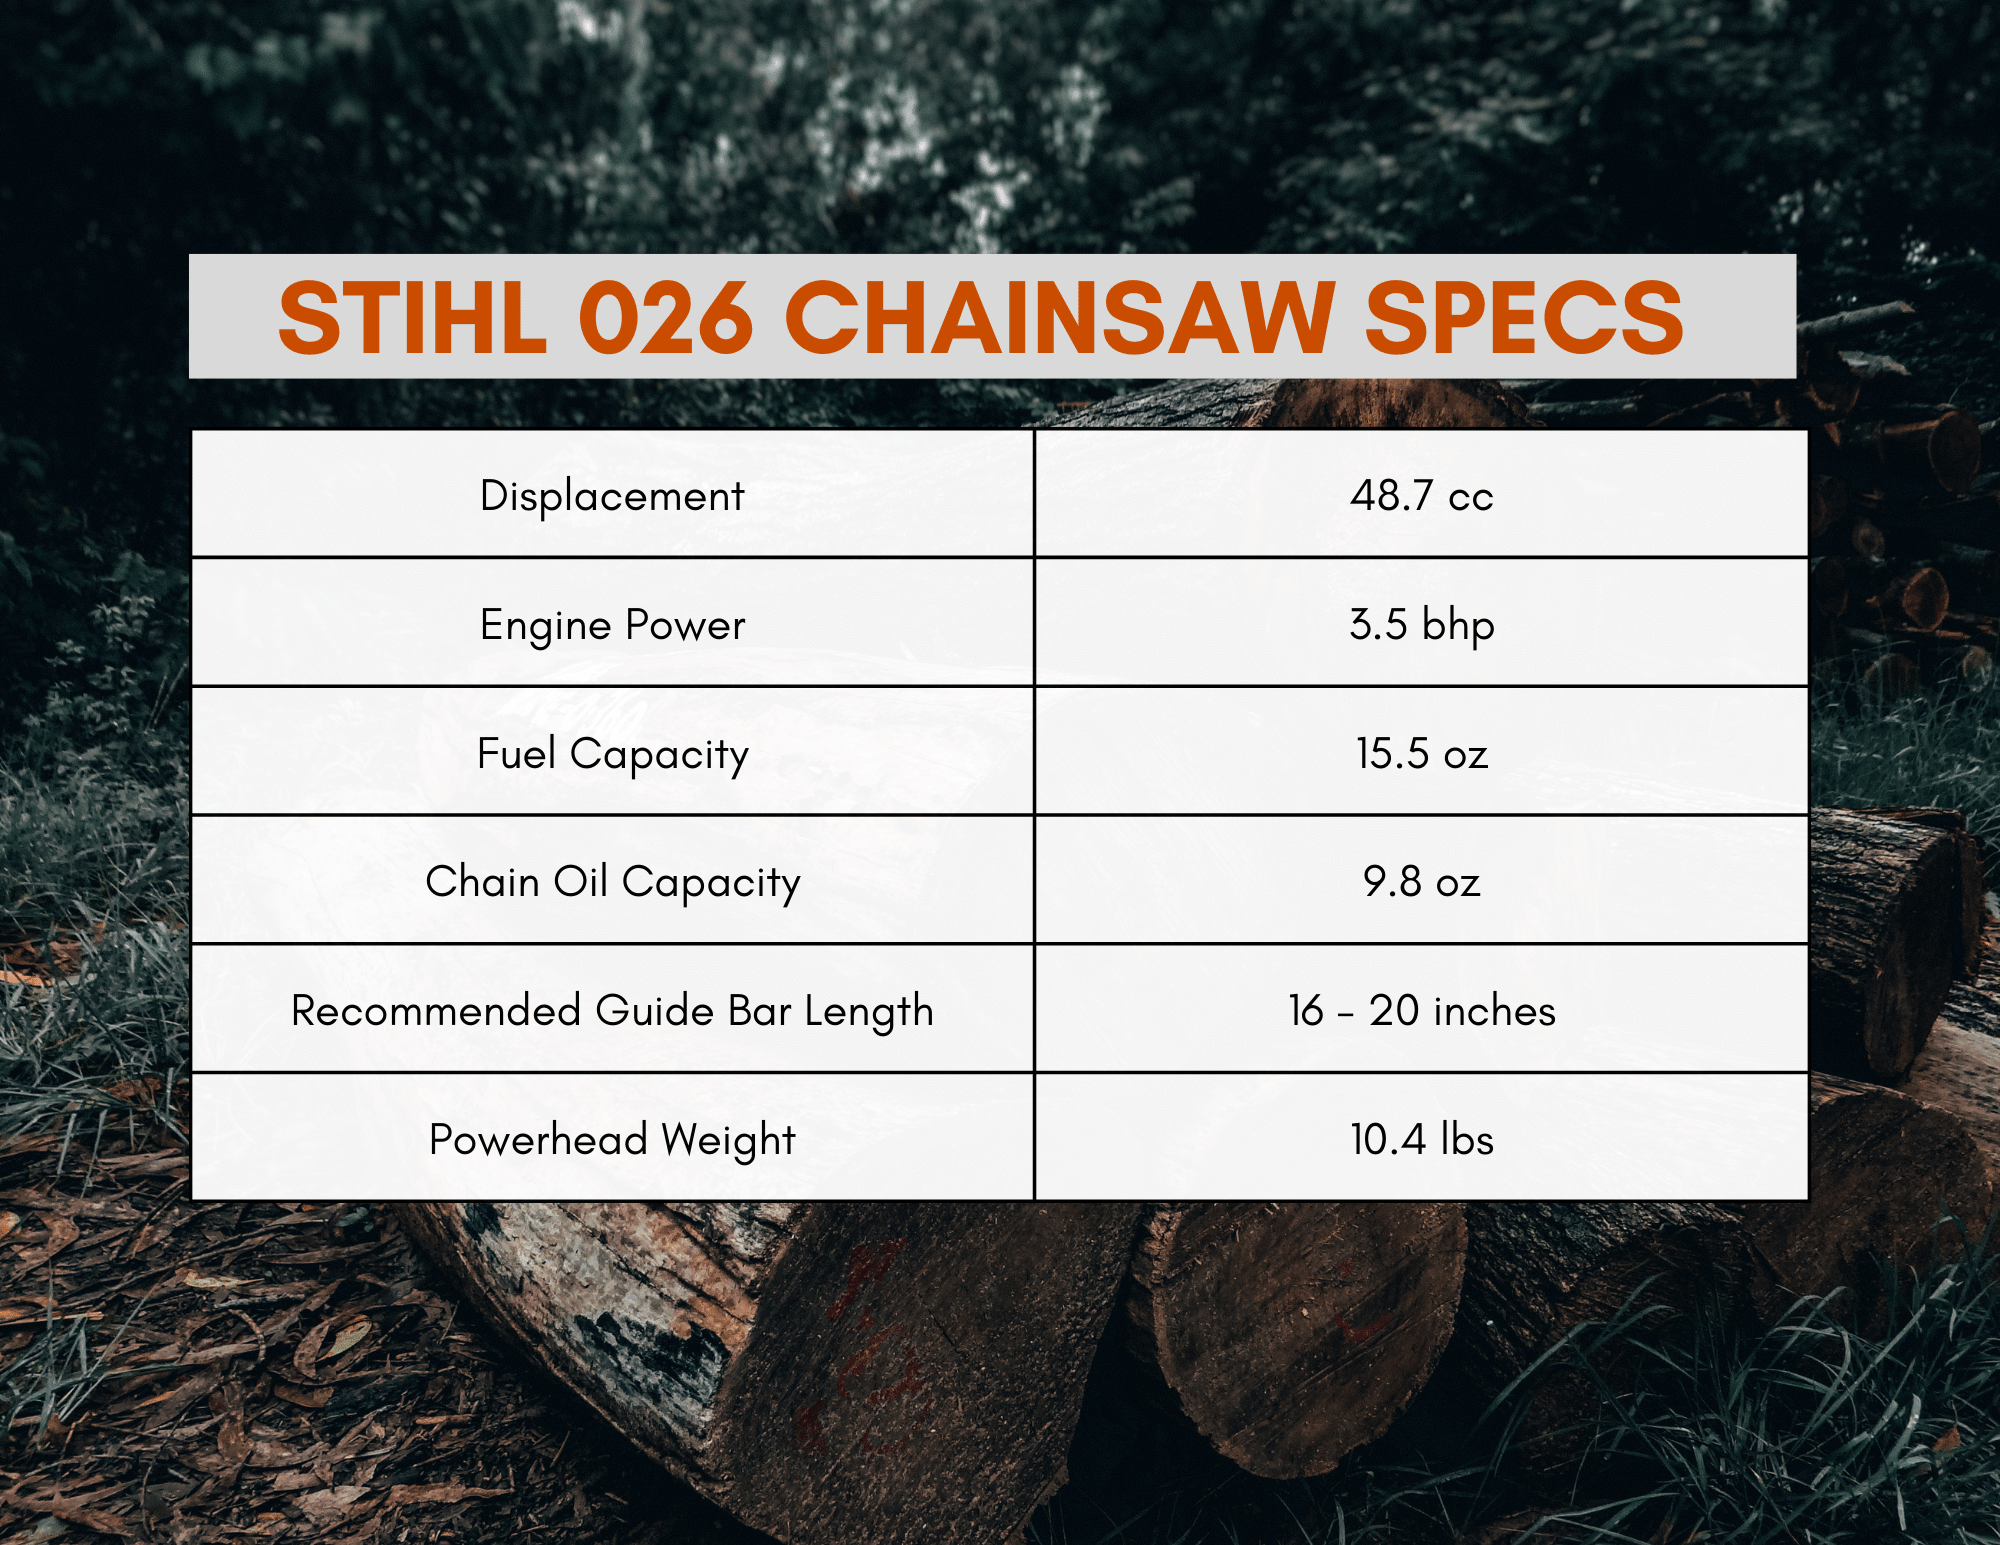 https://www.firewood-for-life.com/images/stihl-026-specs-compressed.png